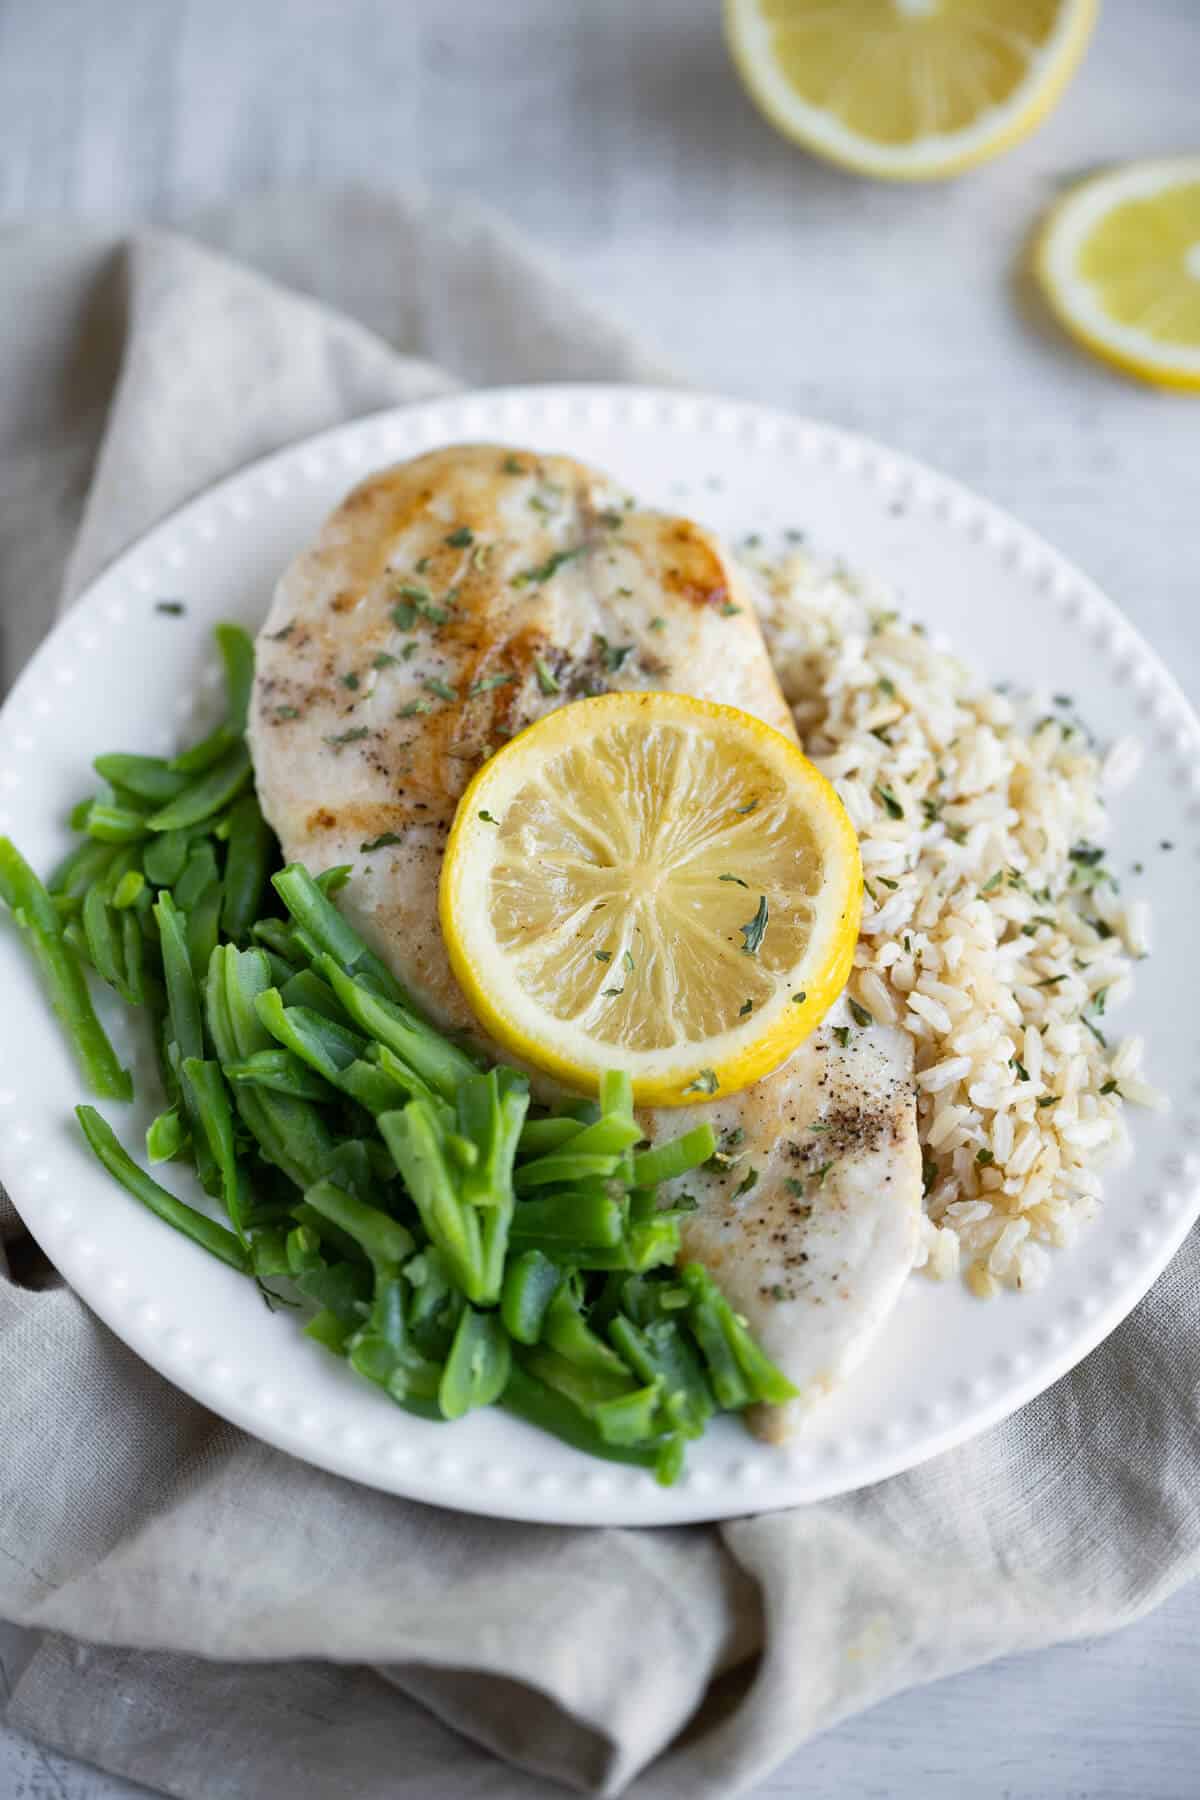 Chicken breast, cooked sous vide method, on a plate with green beans and rice. Chicken is garnished with a lemon slice.